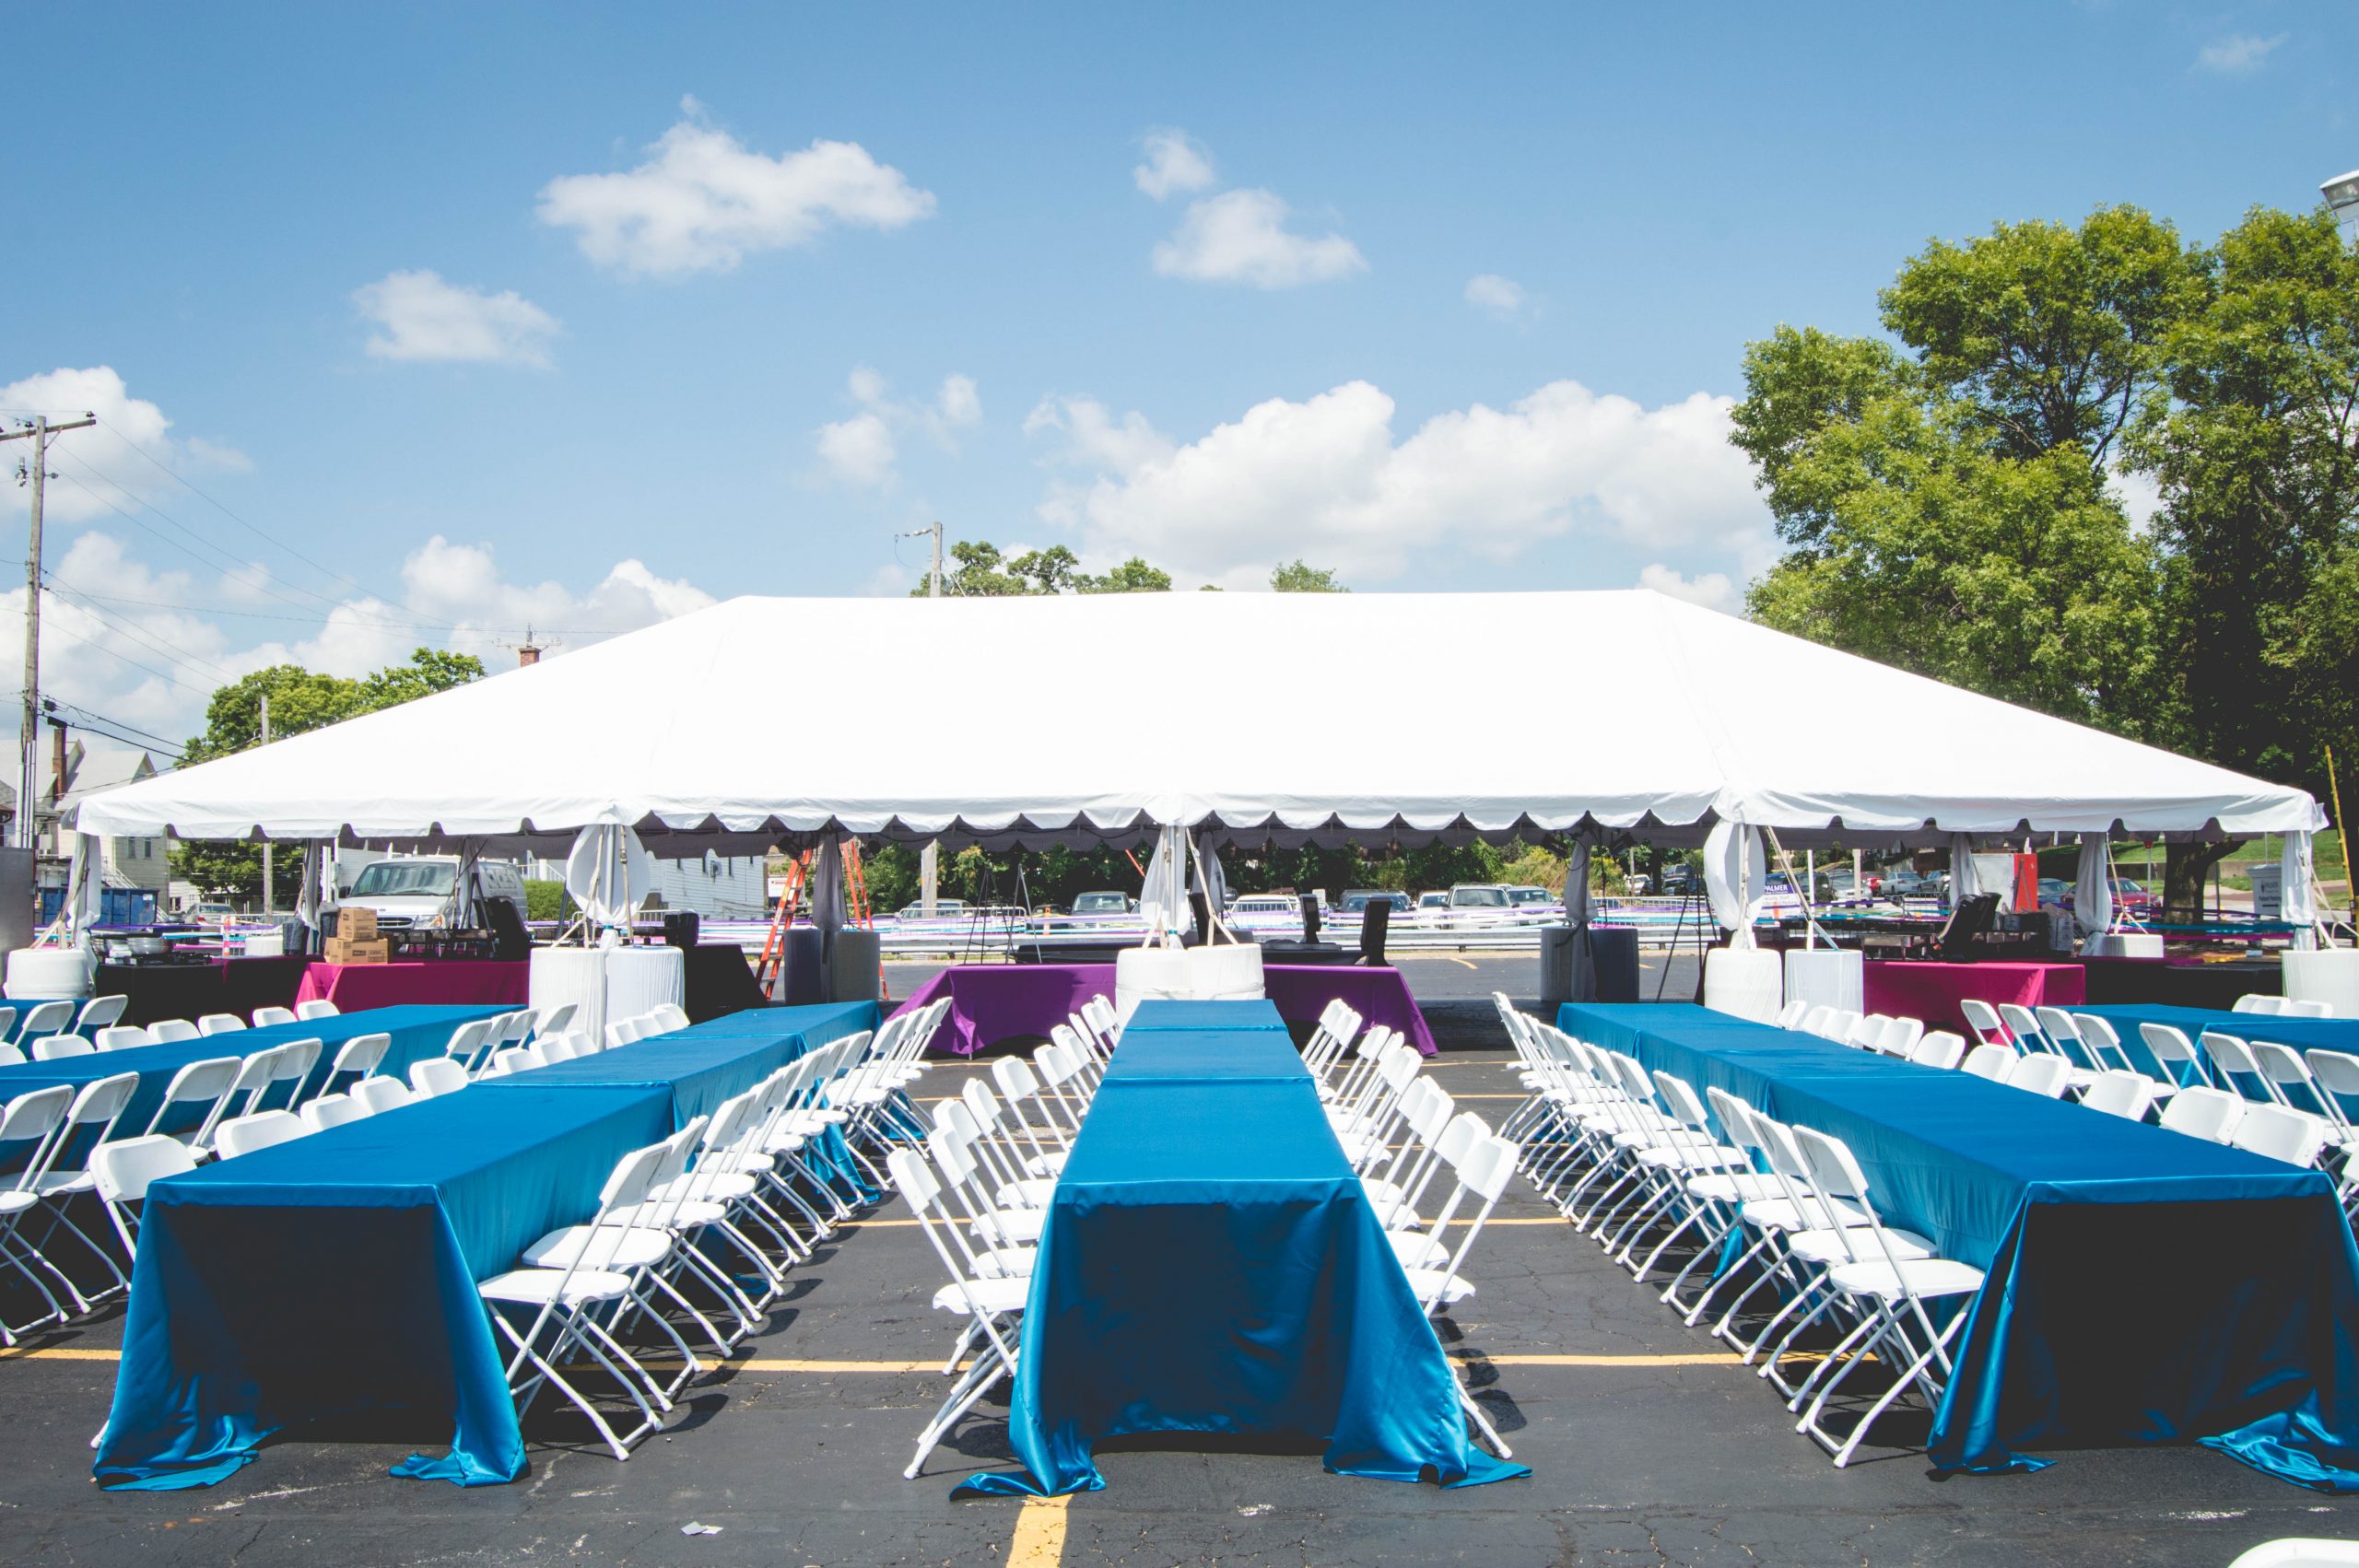 Tent with banquet tables and lennons at the Homecoming Festival at Palmer College of Chiropractic